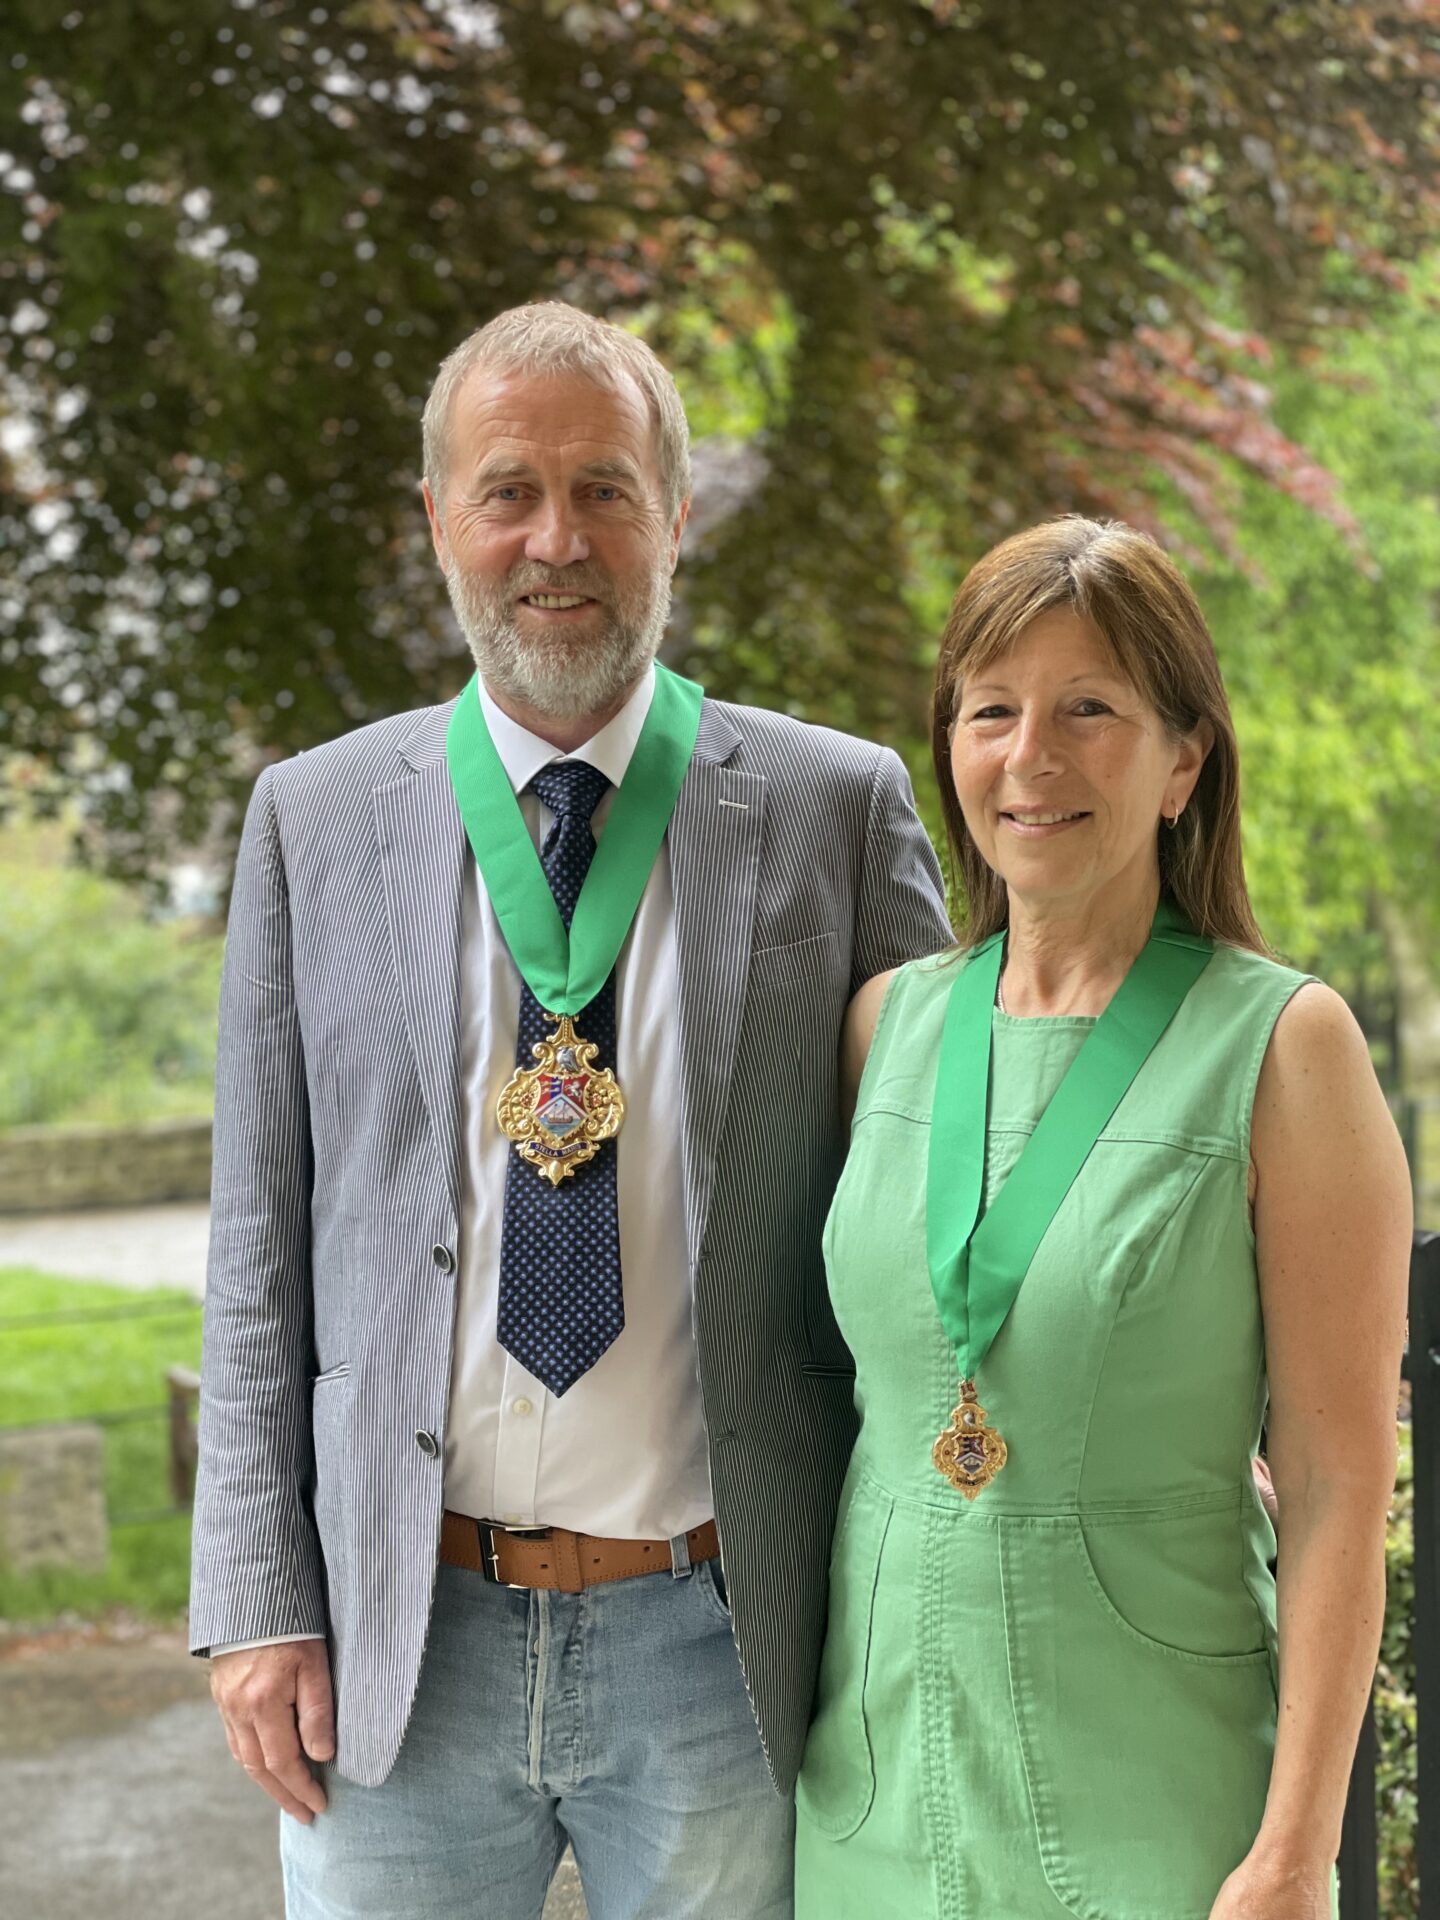 The Mayor of Broadstairs & St. Peter's Cllr Mike Garner and Mayoress Carole Martin, wearing their badges of office.
Picture taken in Pierremont Park, Broadstairs.